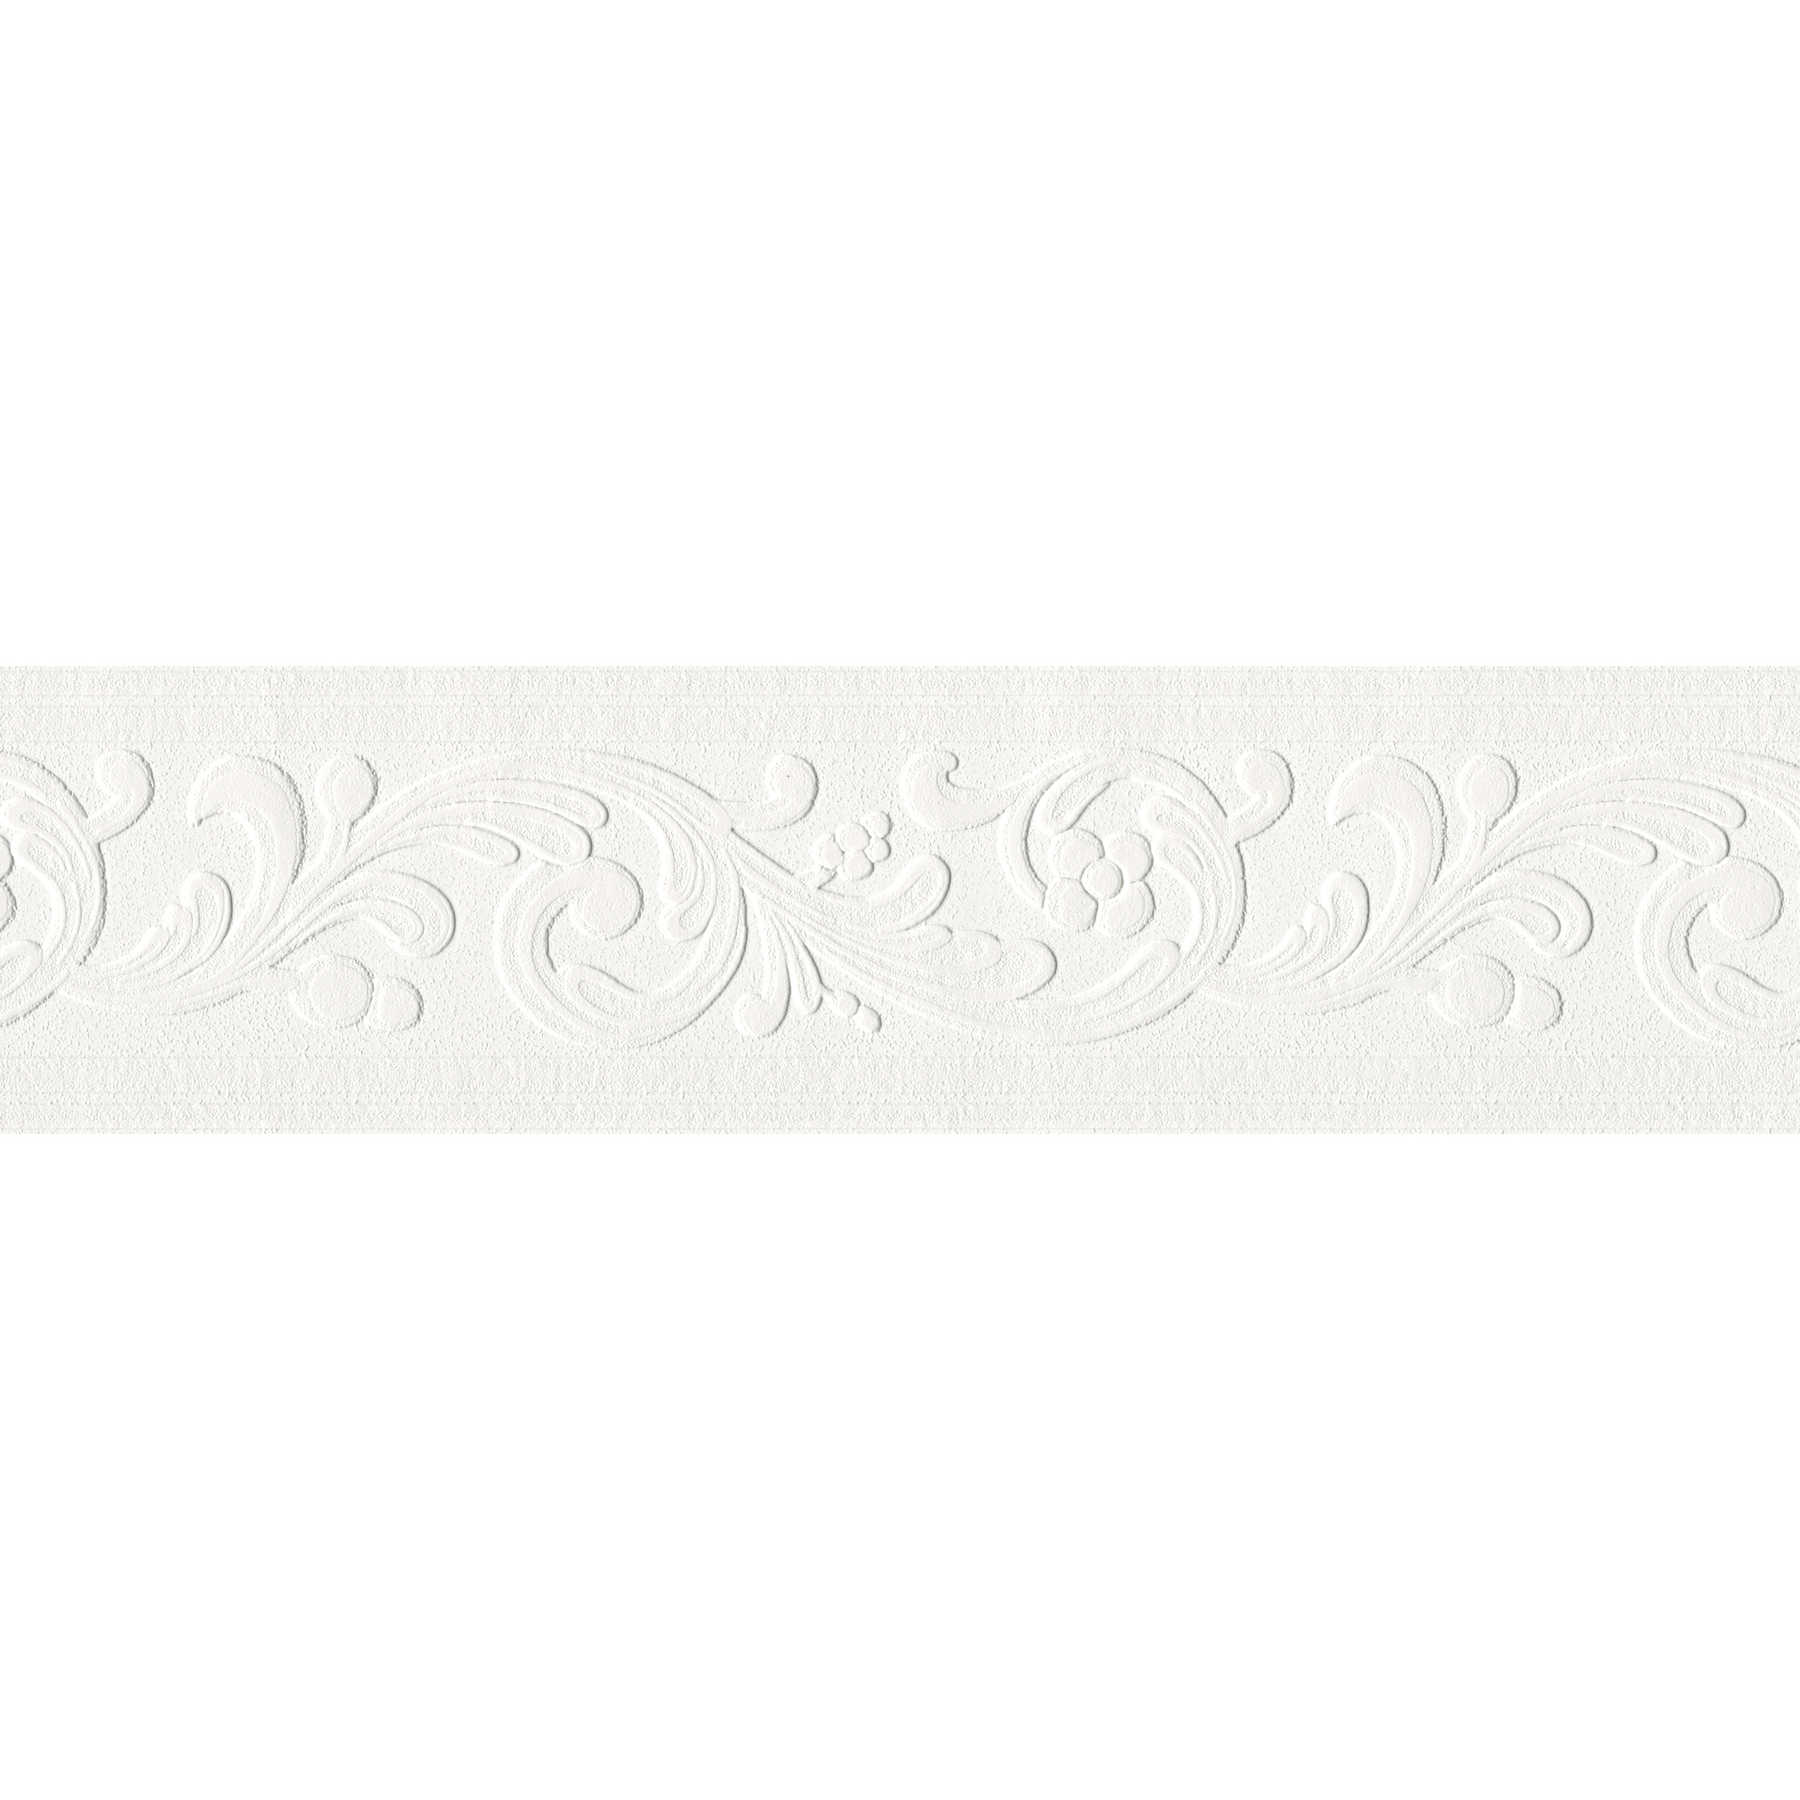         Wallpaper border with ornamental pattern & dimensional structure - white
    